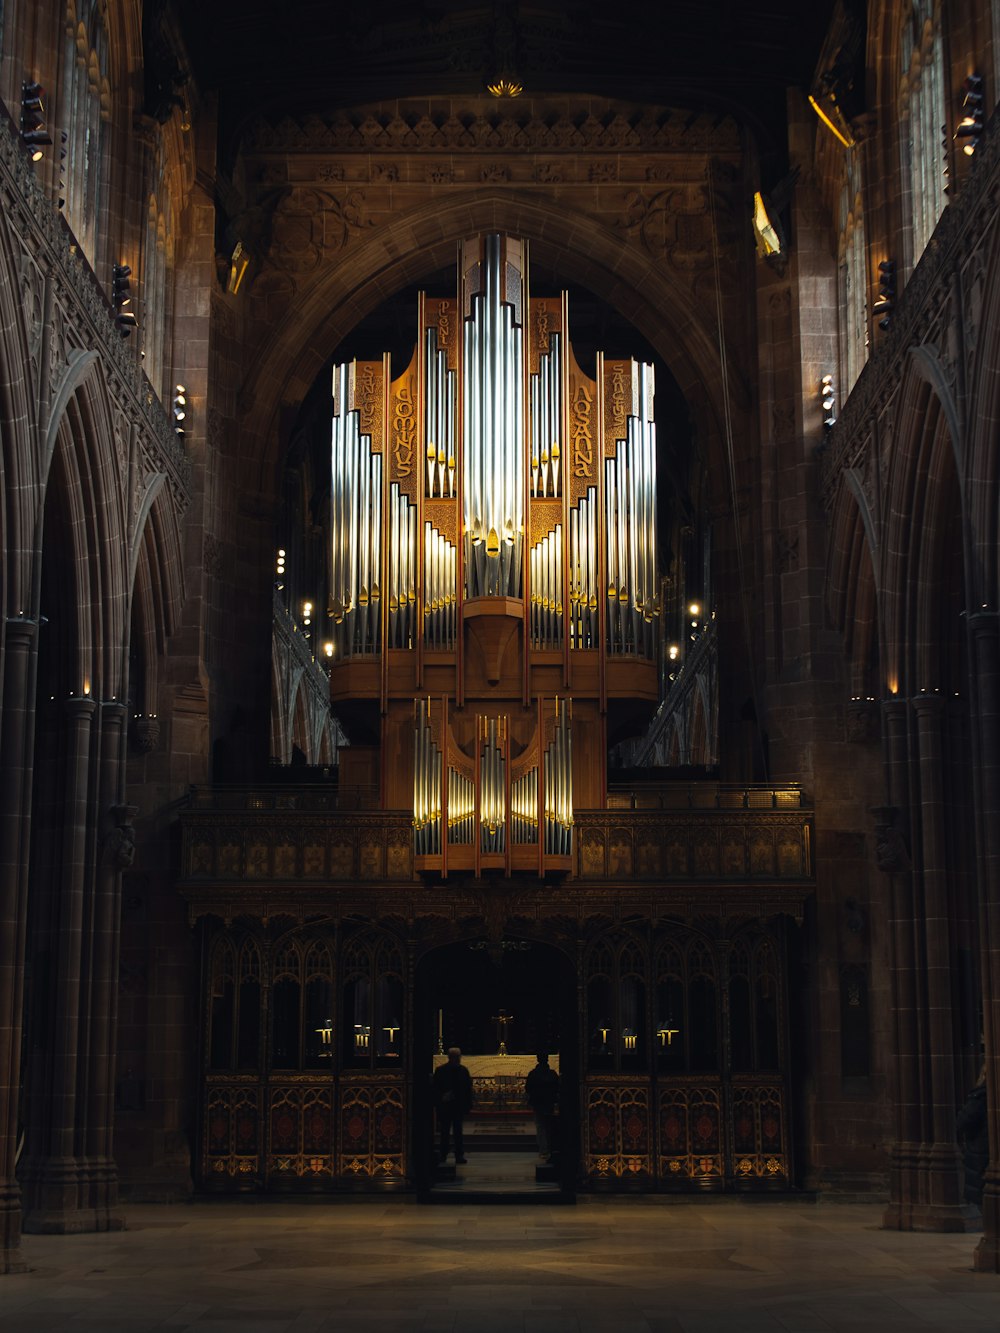 a large pipe organ in a large cathedral